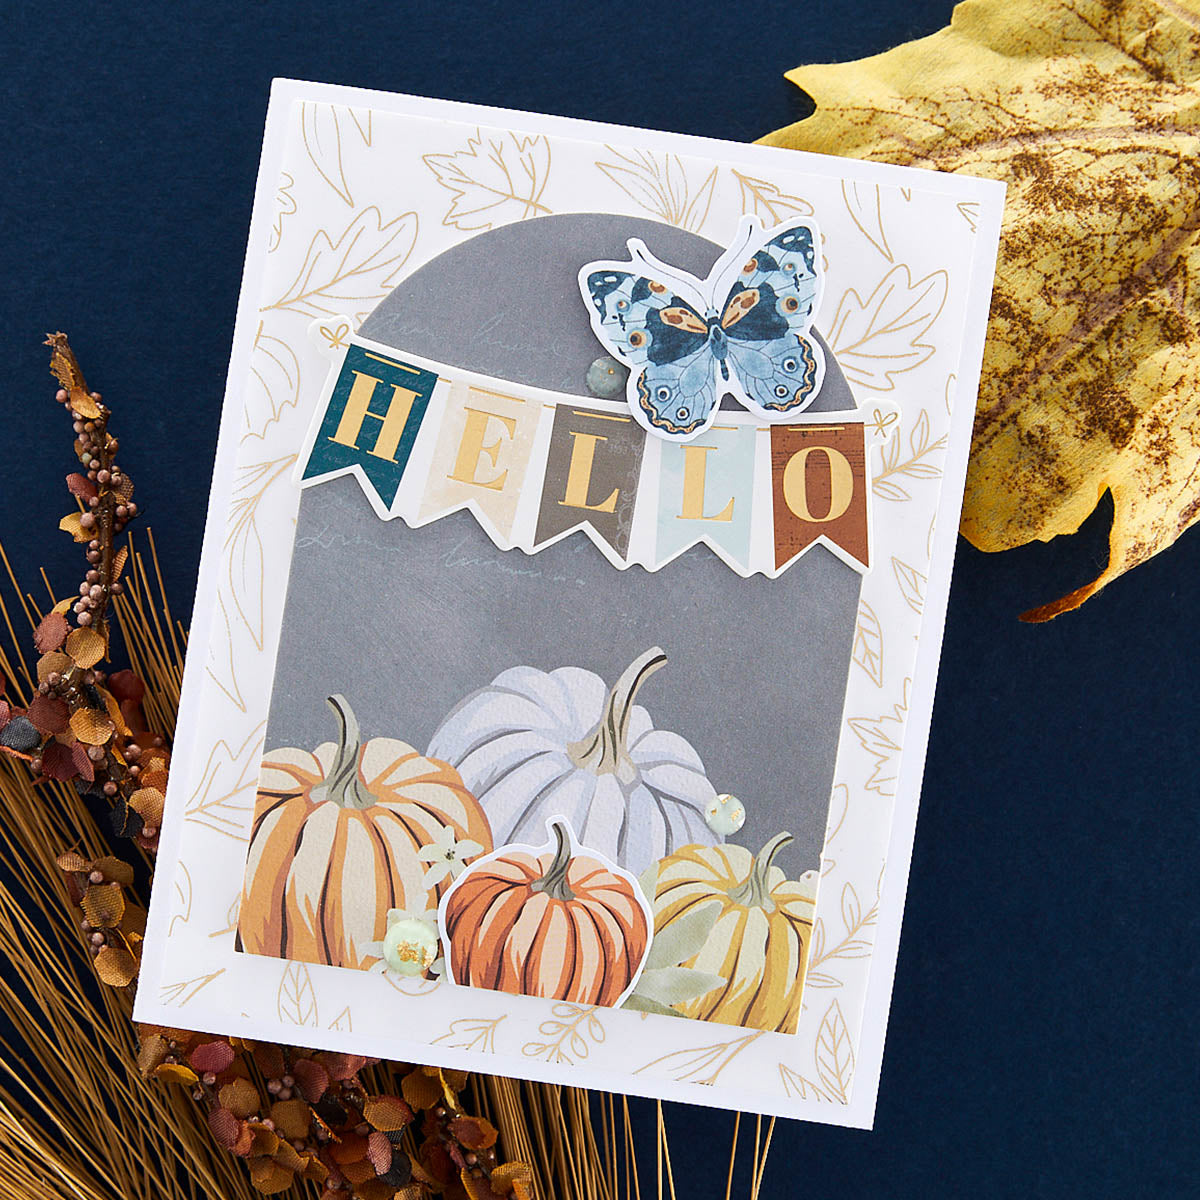 Spellbinders - Foiled Vellum 6 x 6" Paper Pad from the Serenade of Autumn Collection